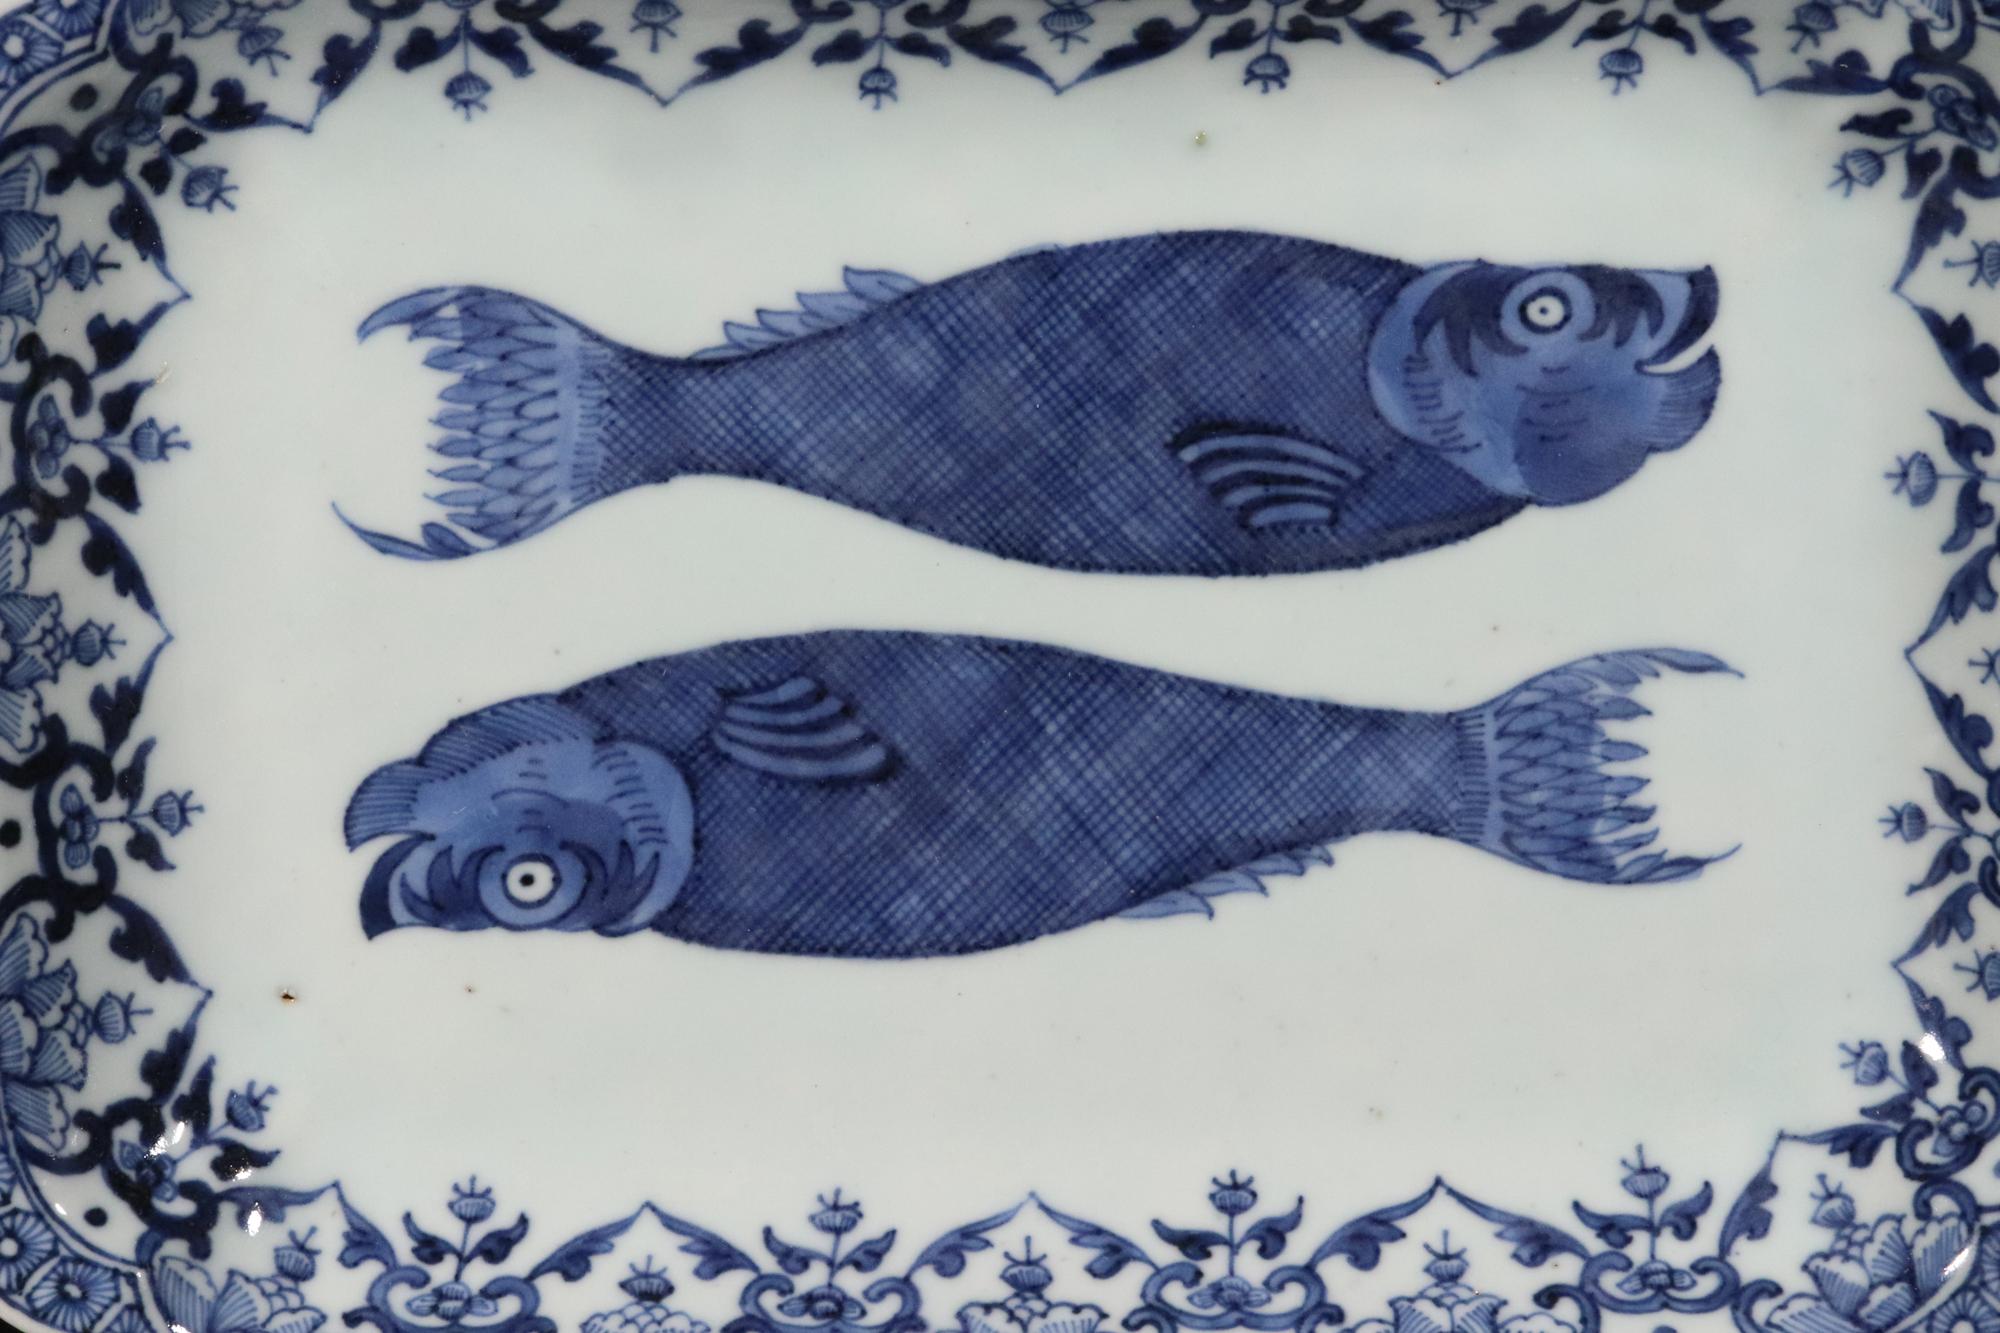 Chinese Export porcelain rare blue & white double herring dish,
Circa 1765

The rectangular Chinese Export underglaze blue and white dish of rare large size is painted with two herrings, each facing a different way with an elaborate bordered edge